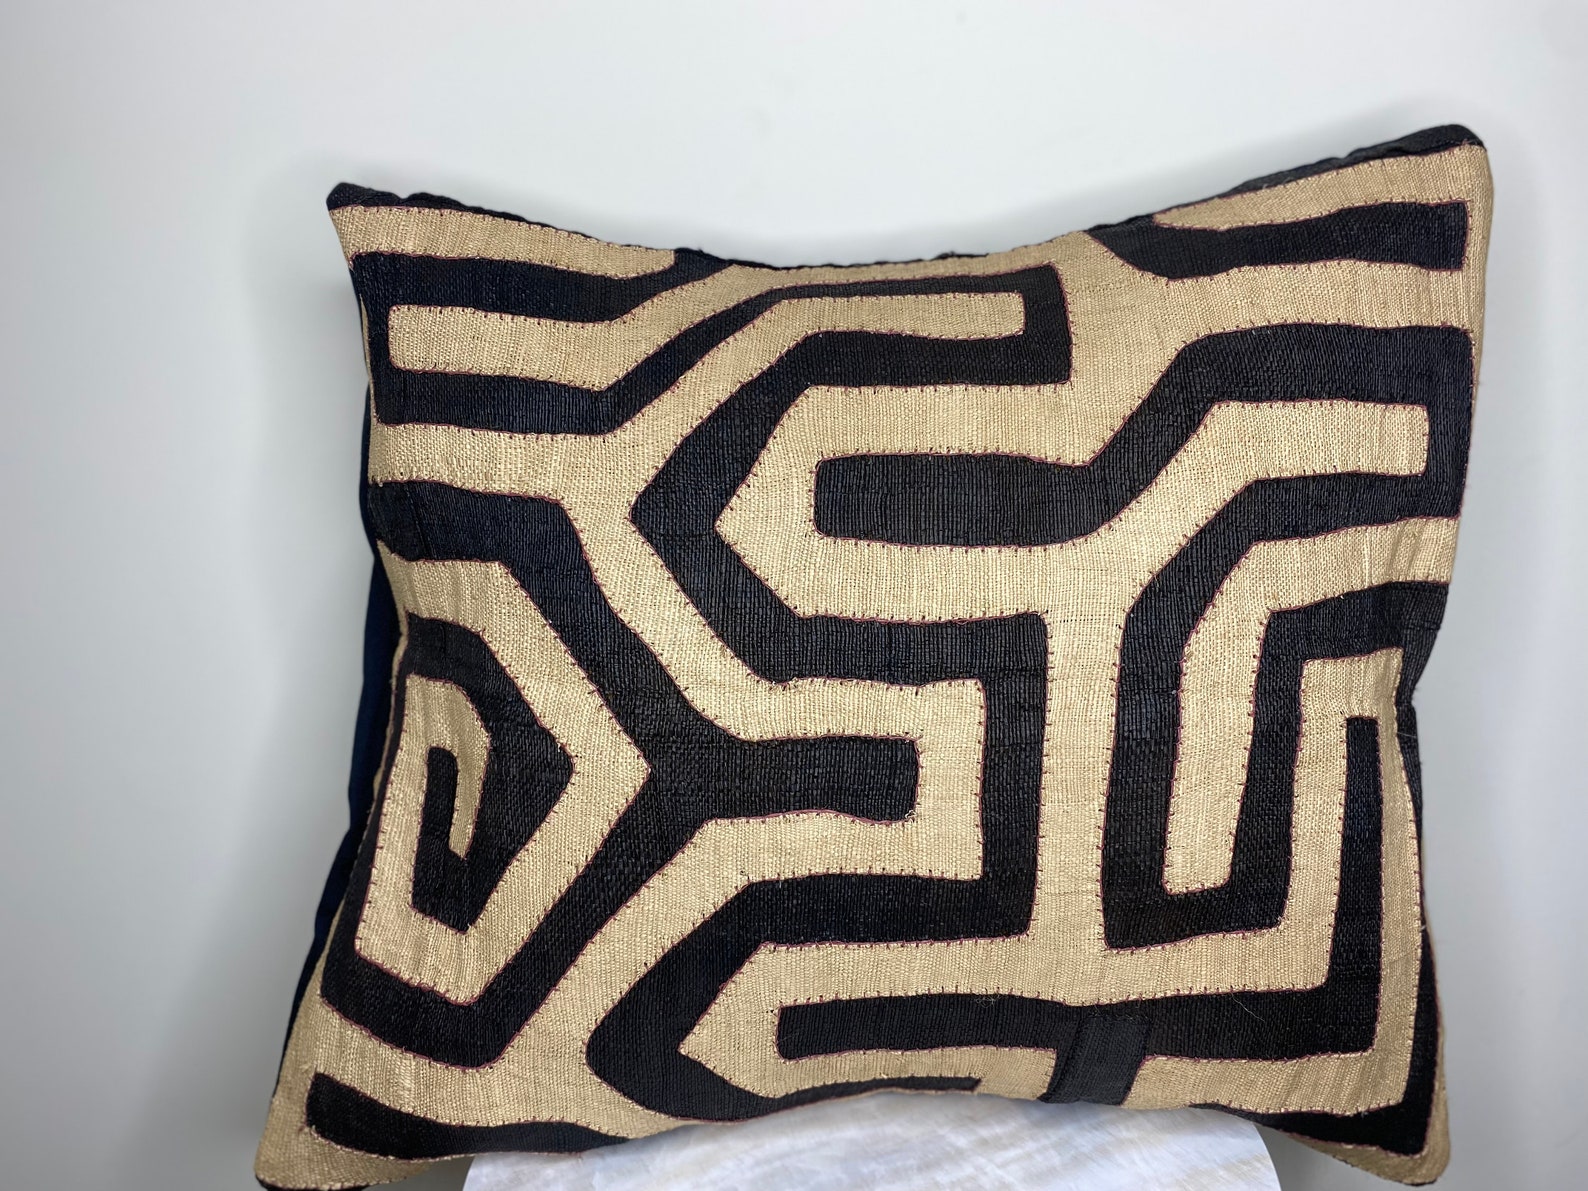 Gorgeous kuba raffia cushion cover with geometric patterns in earth tones.